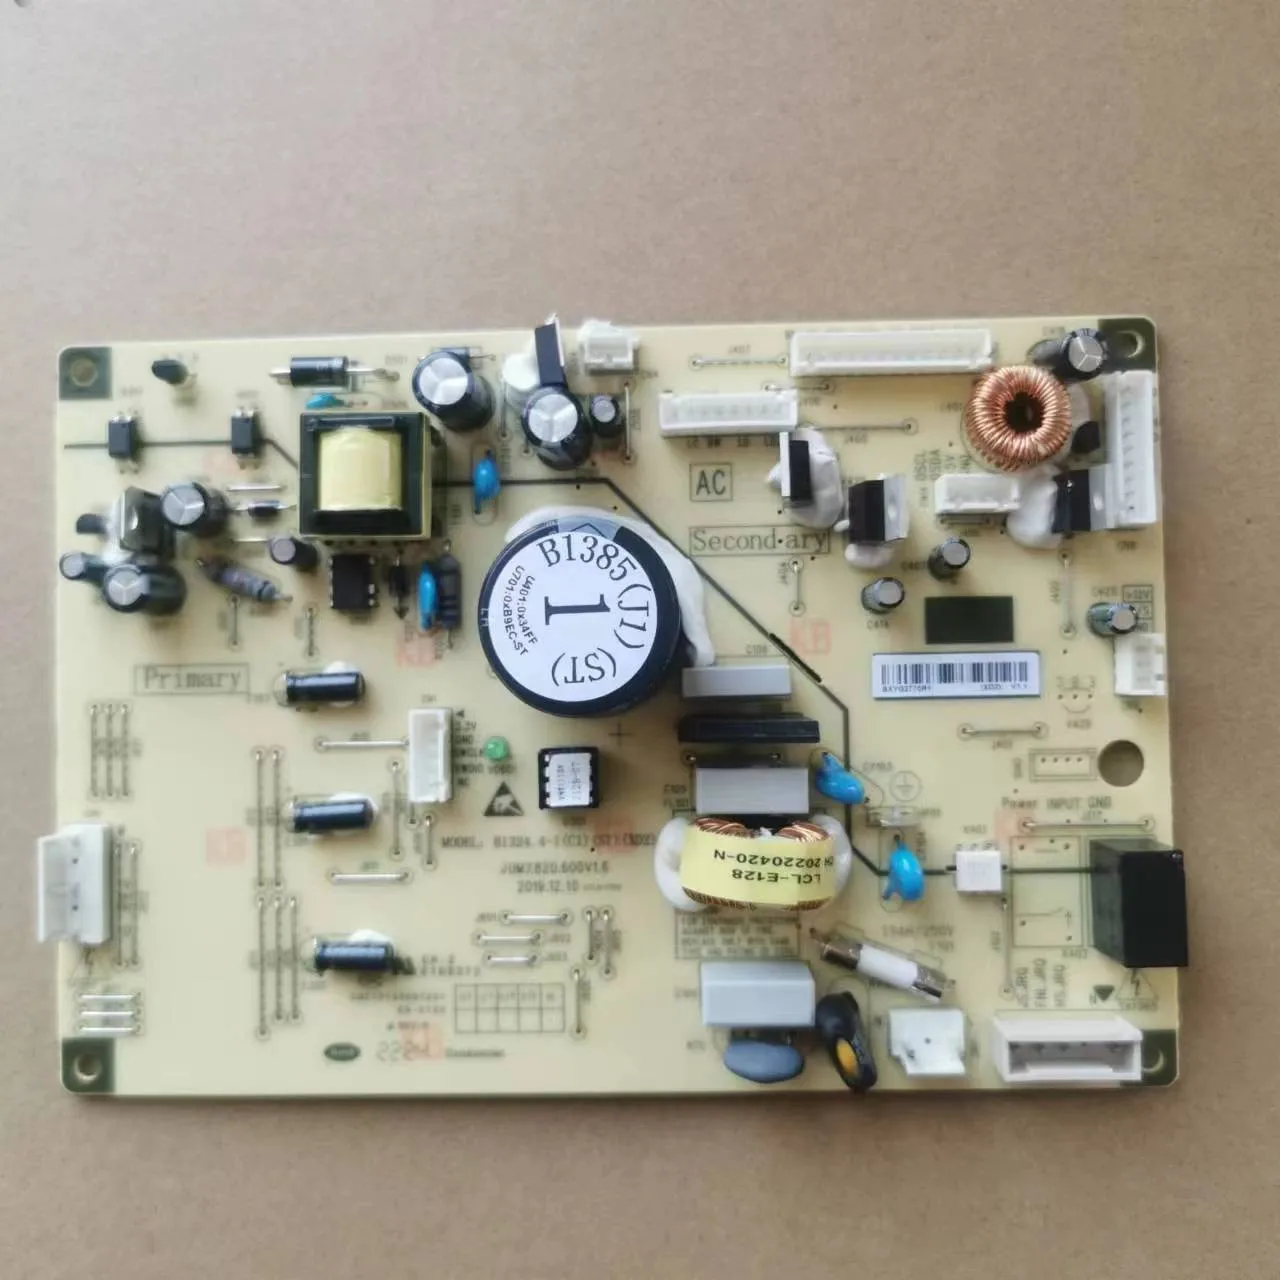 

Suitable for Meiling refrigerator B1385 (H1) (J1) (J2) (D1) (W1) (H2) (M1) (ST) (Z1) motherboard computer board